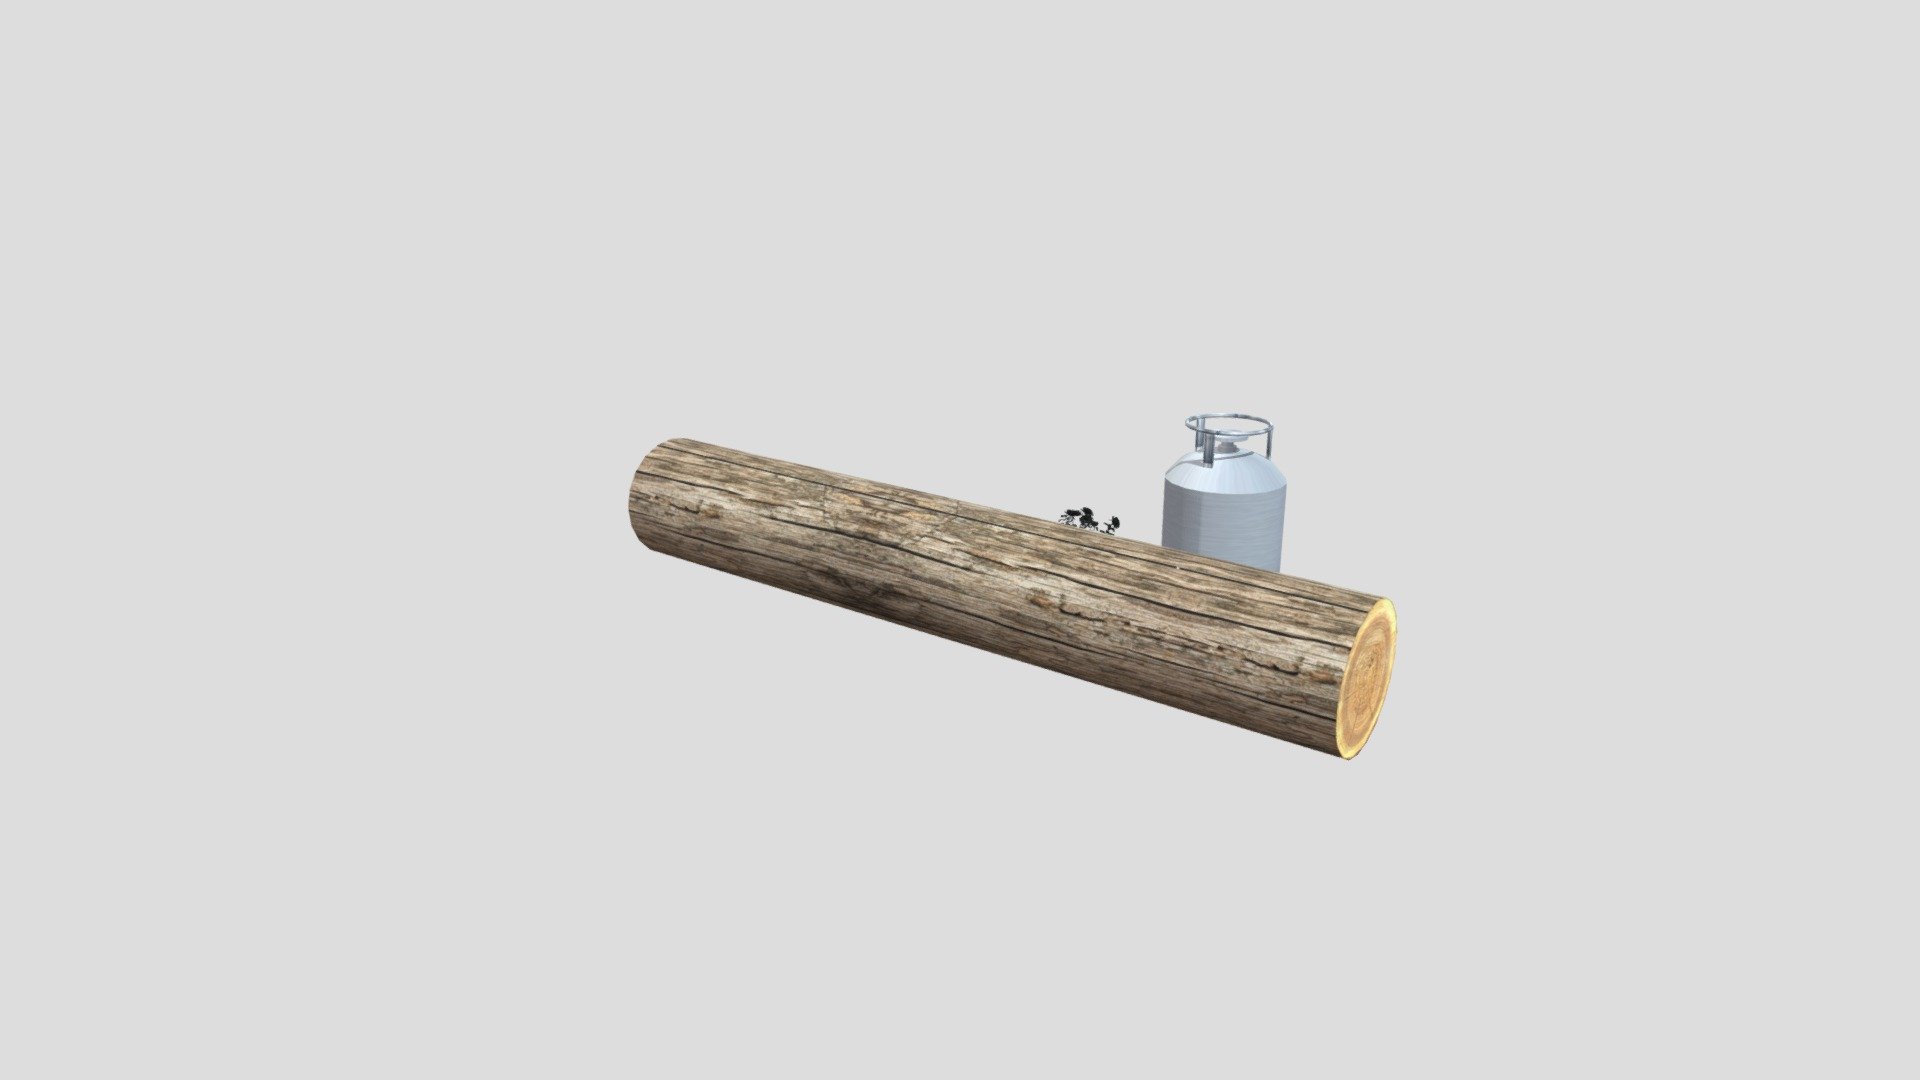 I made 5 finished props. This is for an assignment for my 3D course.
My 5 props are:
- hammer
- axe
- gas cylinder
- log
- potted plant

Enjoy! - 5 Finished Props - Download Free 3D model by Robbe_Belmans 3d model